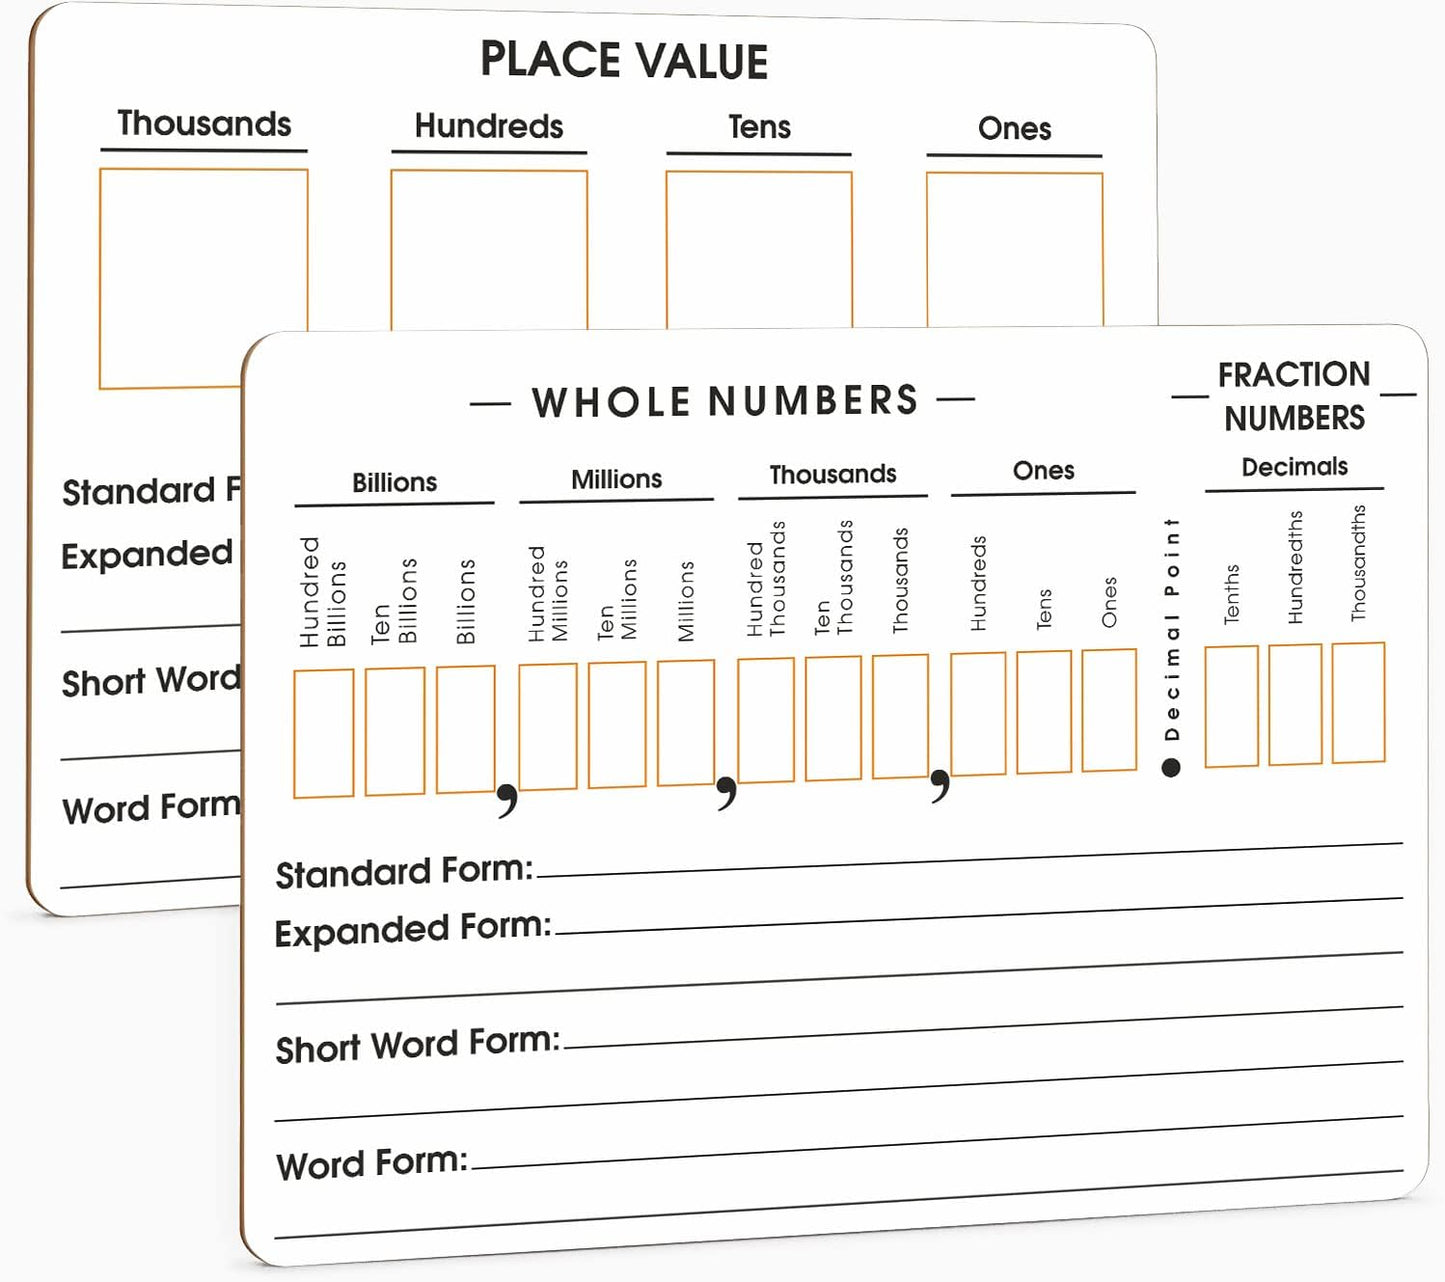 Place Value Double Sided Board 9"x12"